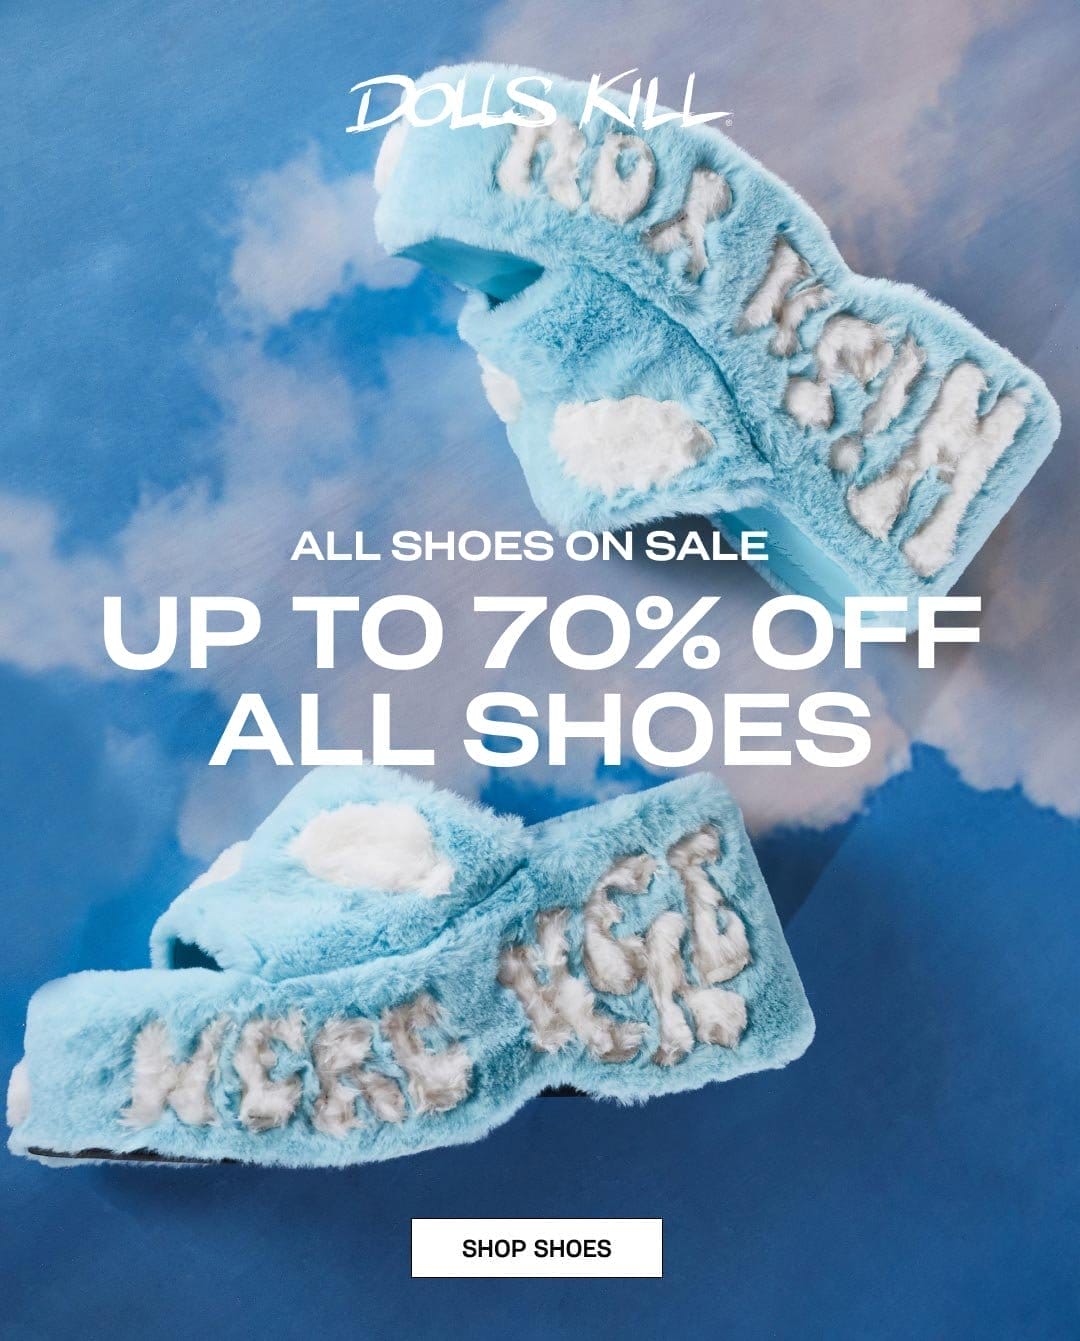 ALL SHOES ON SALE